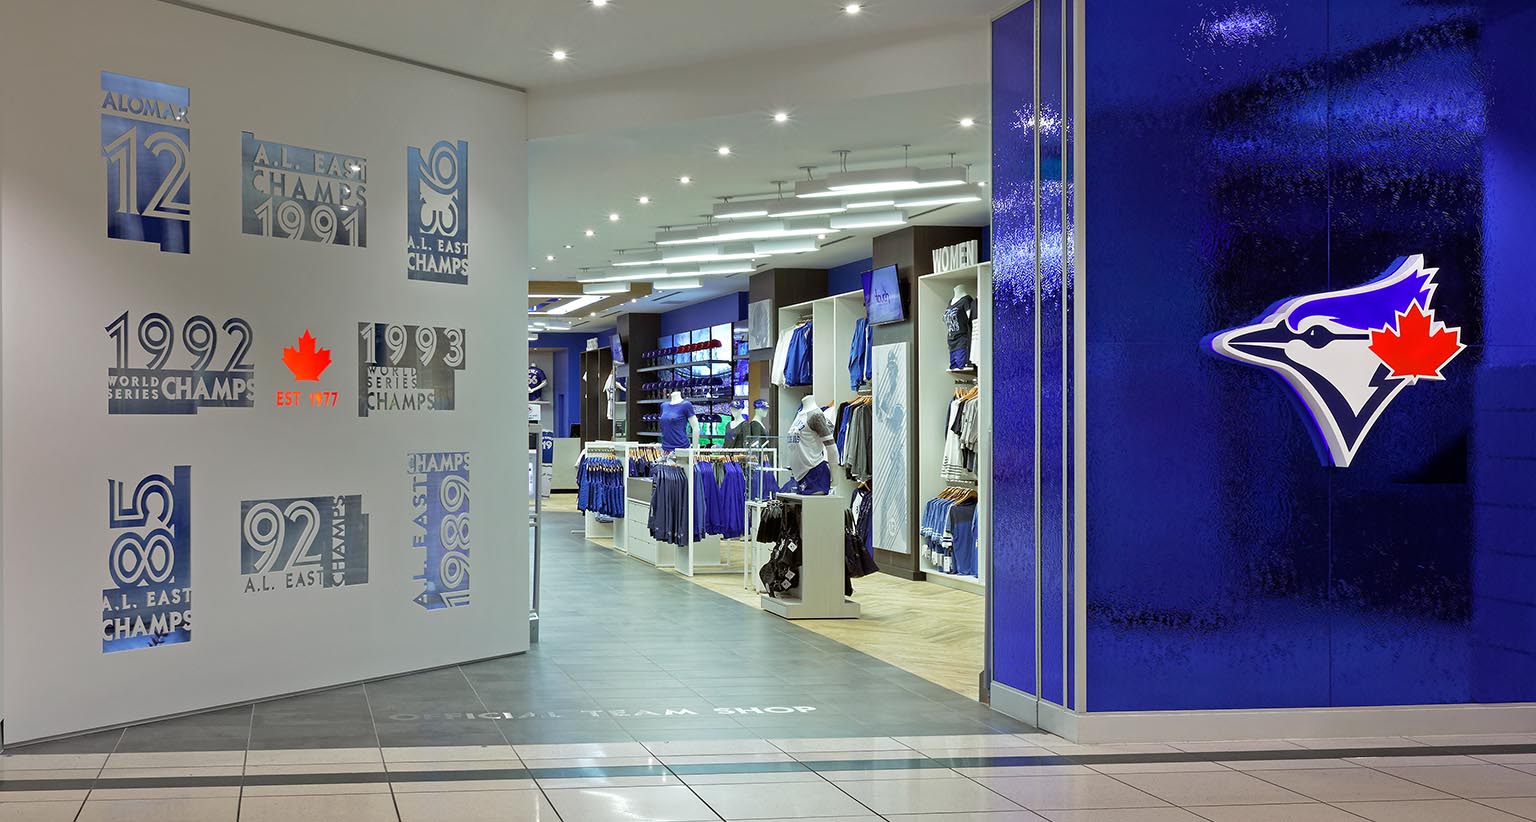 Blue Jays open flagship store at Eaton Centre